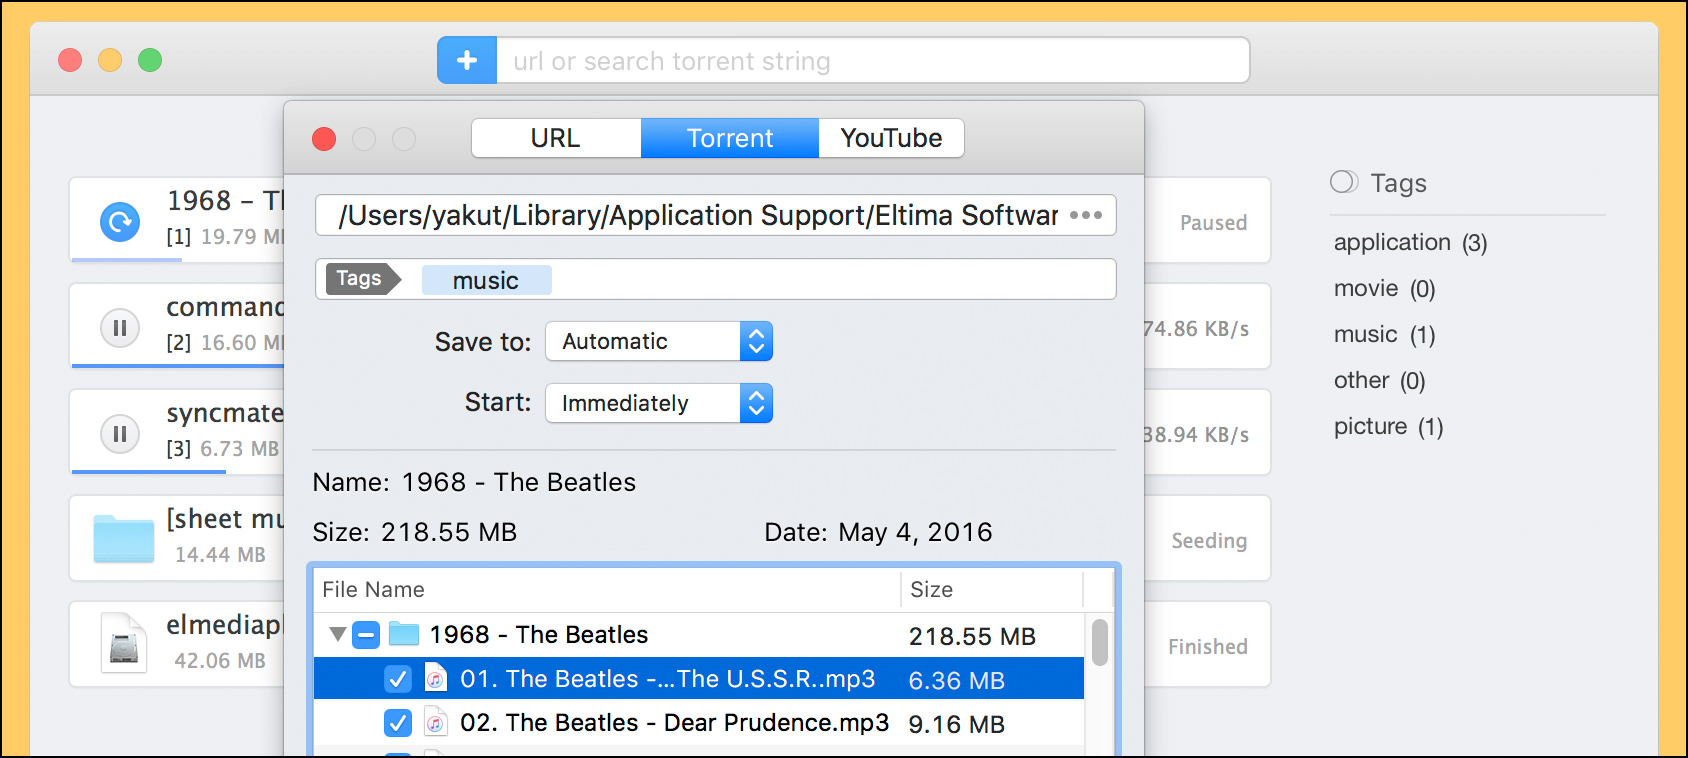 Free Download Manager For Mac Os X 10.4.11